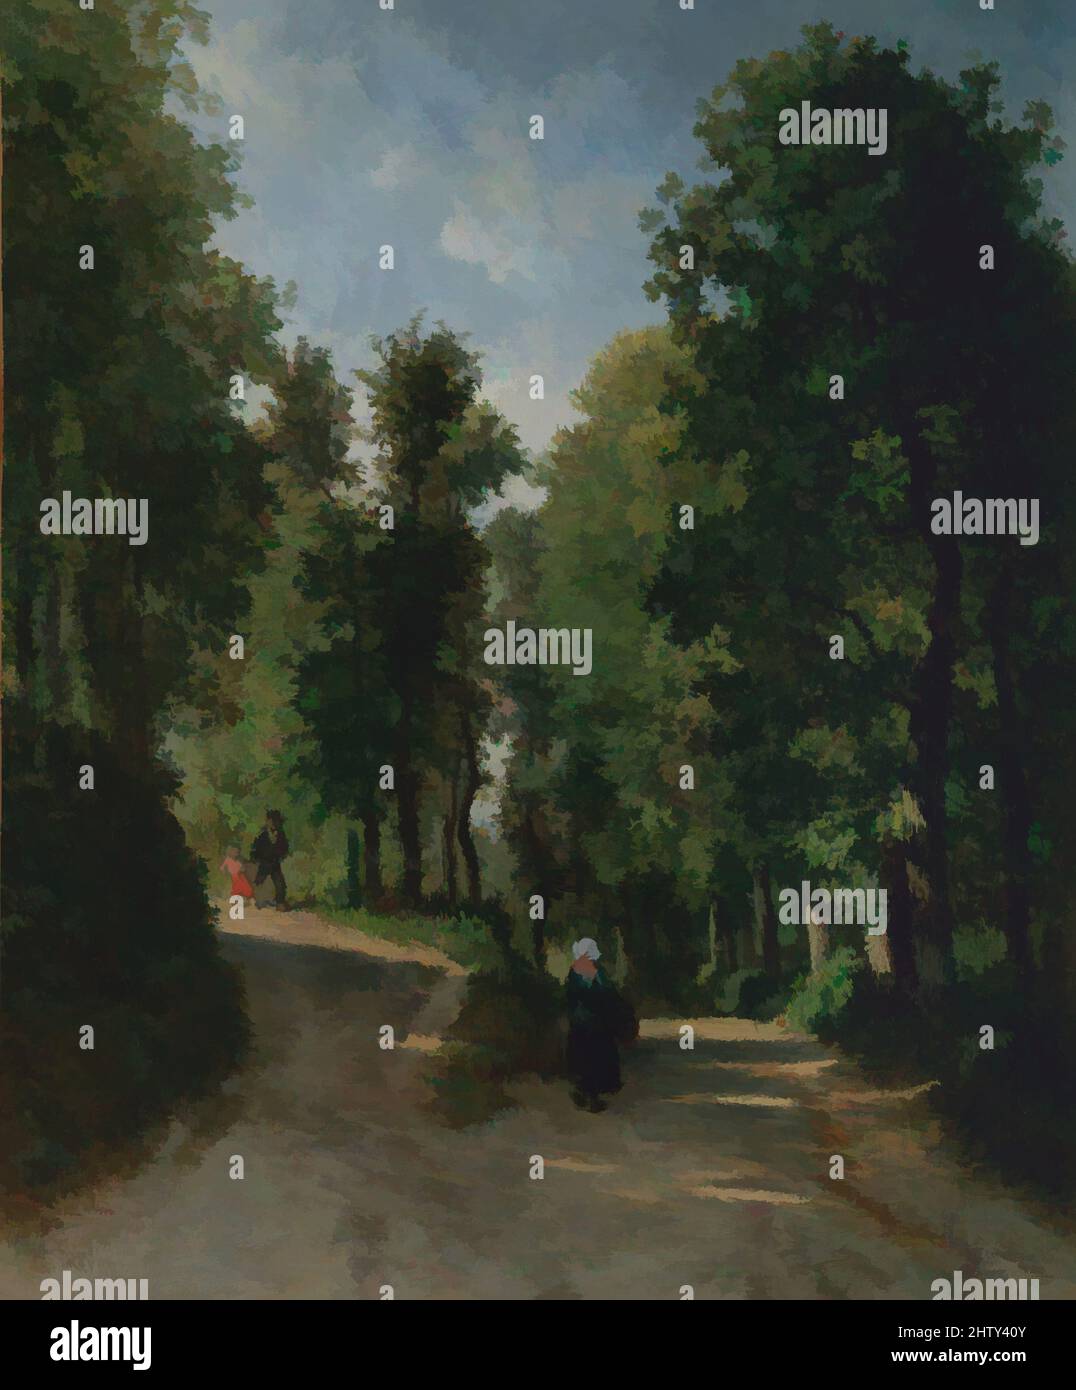 Art inspired by Road in the Woods, Oil on canvas, 22 7/8 x 19 in. (58.1 x 48.3 cm), Paintings, Constant Troyon (French, Sèvres 1810–1865 Paris), In this animated scene of a simple dirt track, the eye is led simultaneously upward to the left and downward to the right. Troyon adopted, Classic works modernized by Artotop with a splash of modernity. Shapes, color and value, eye-catching visual impact on art. Emotions through freedom of artworks in a contemporary way. A timeless message pursuing a wildly creative new direction. Artists turning to the digital medium and creating the Artotop NFT Stock Photo